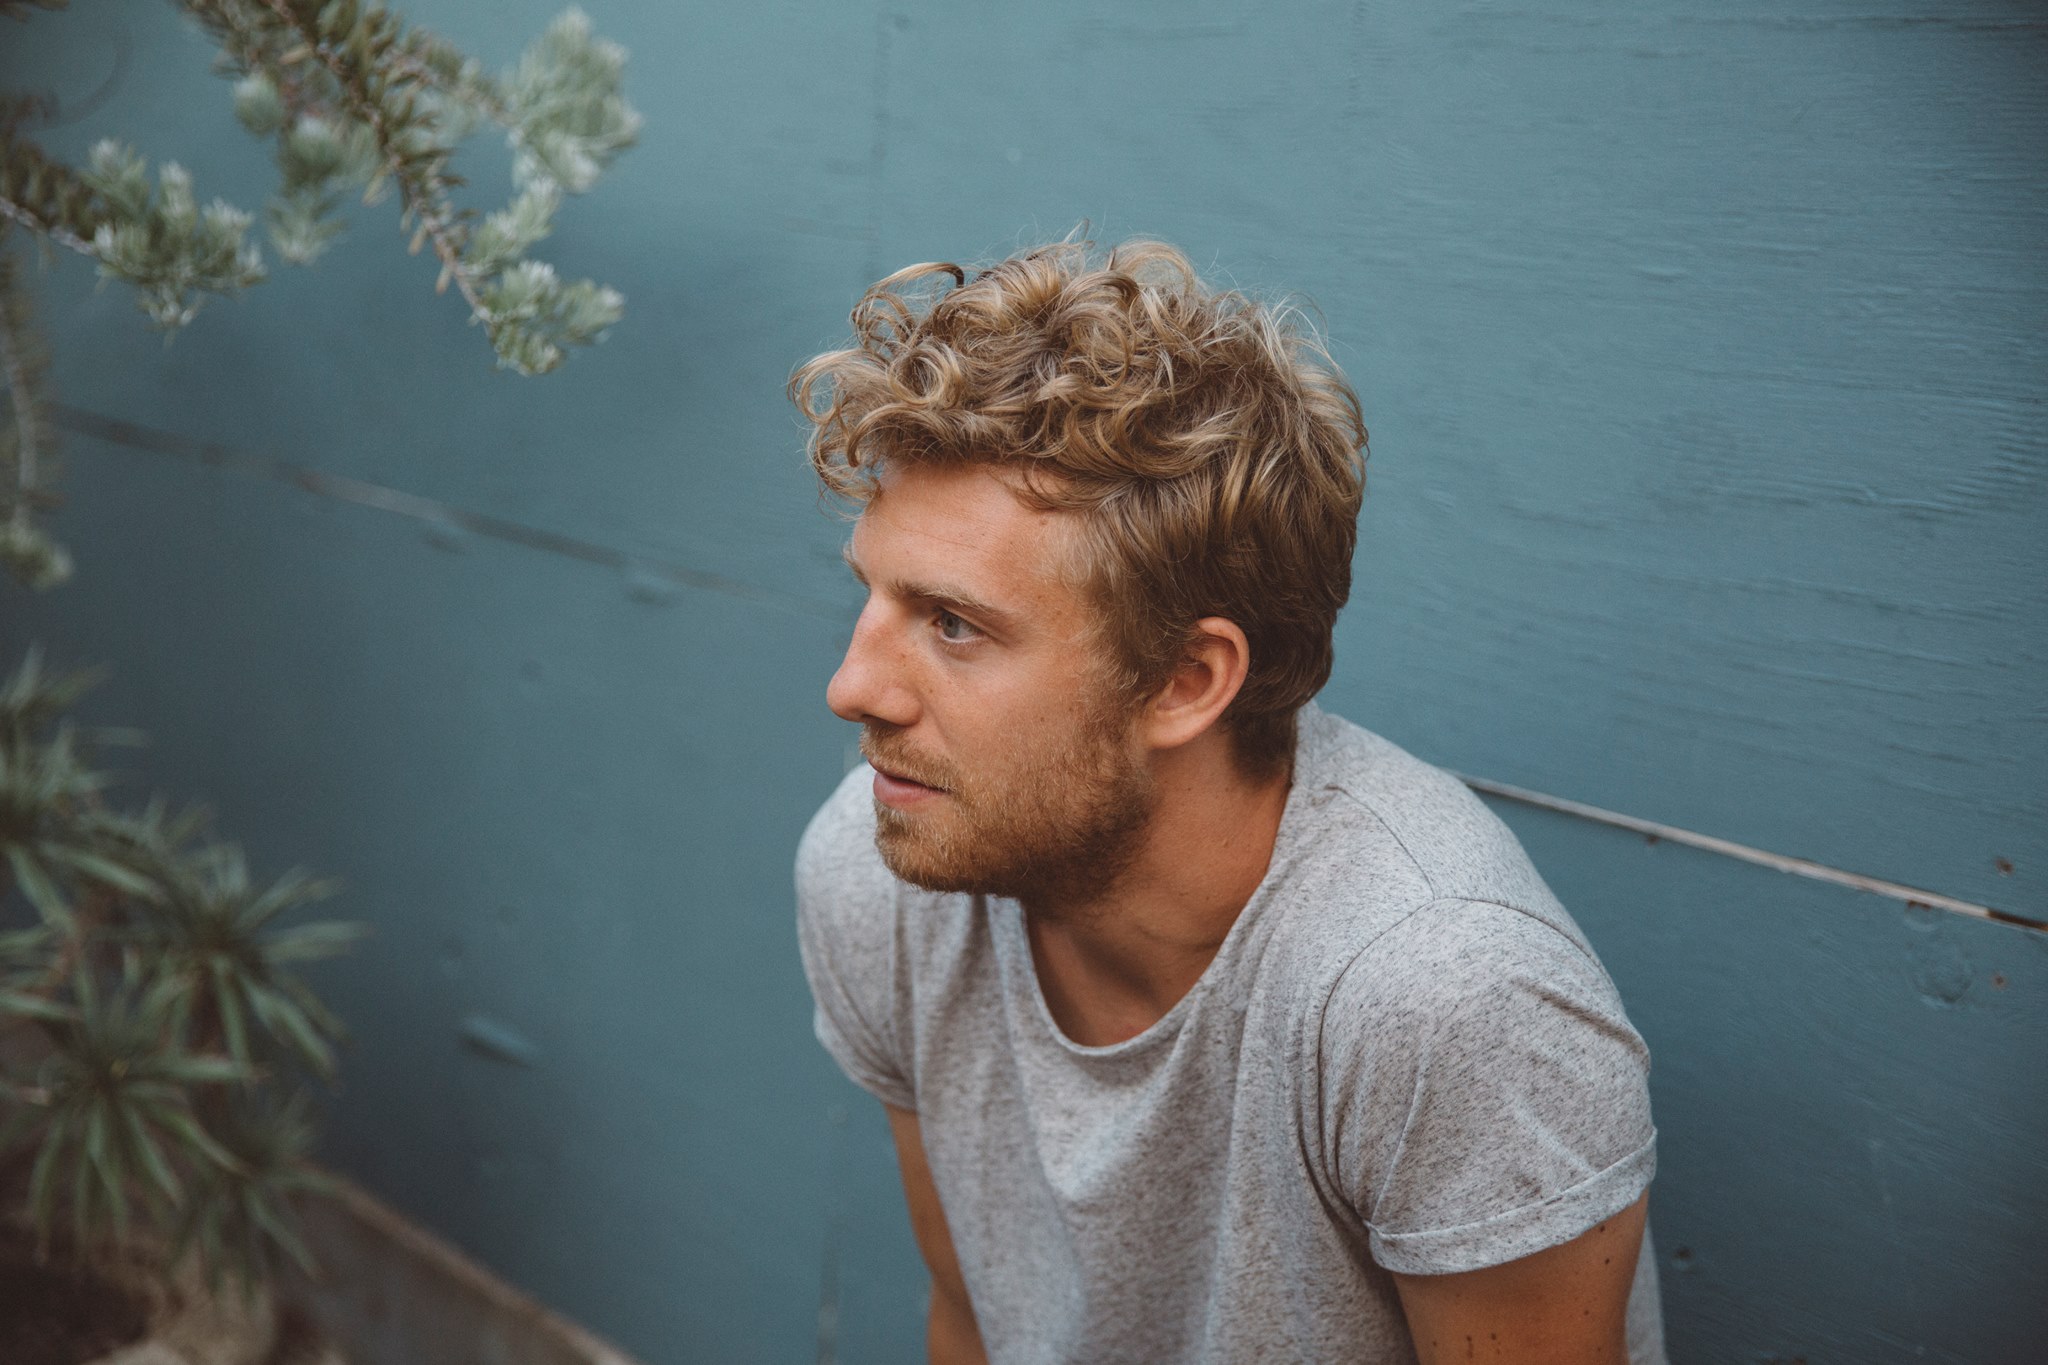 Top TV Song Last Week: Pieces by Andrew Belle - Tunefind